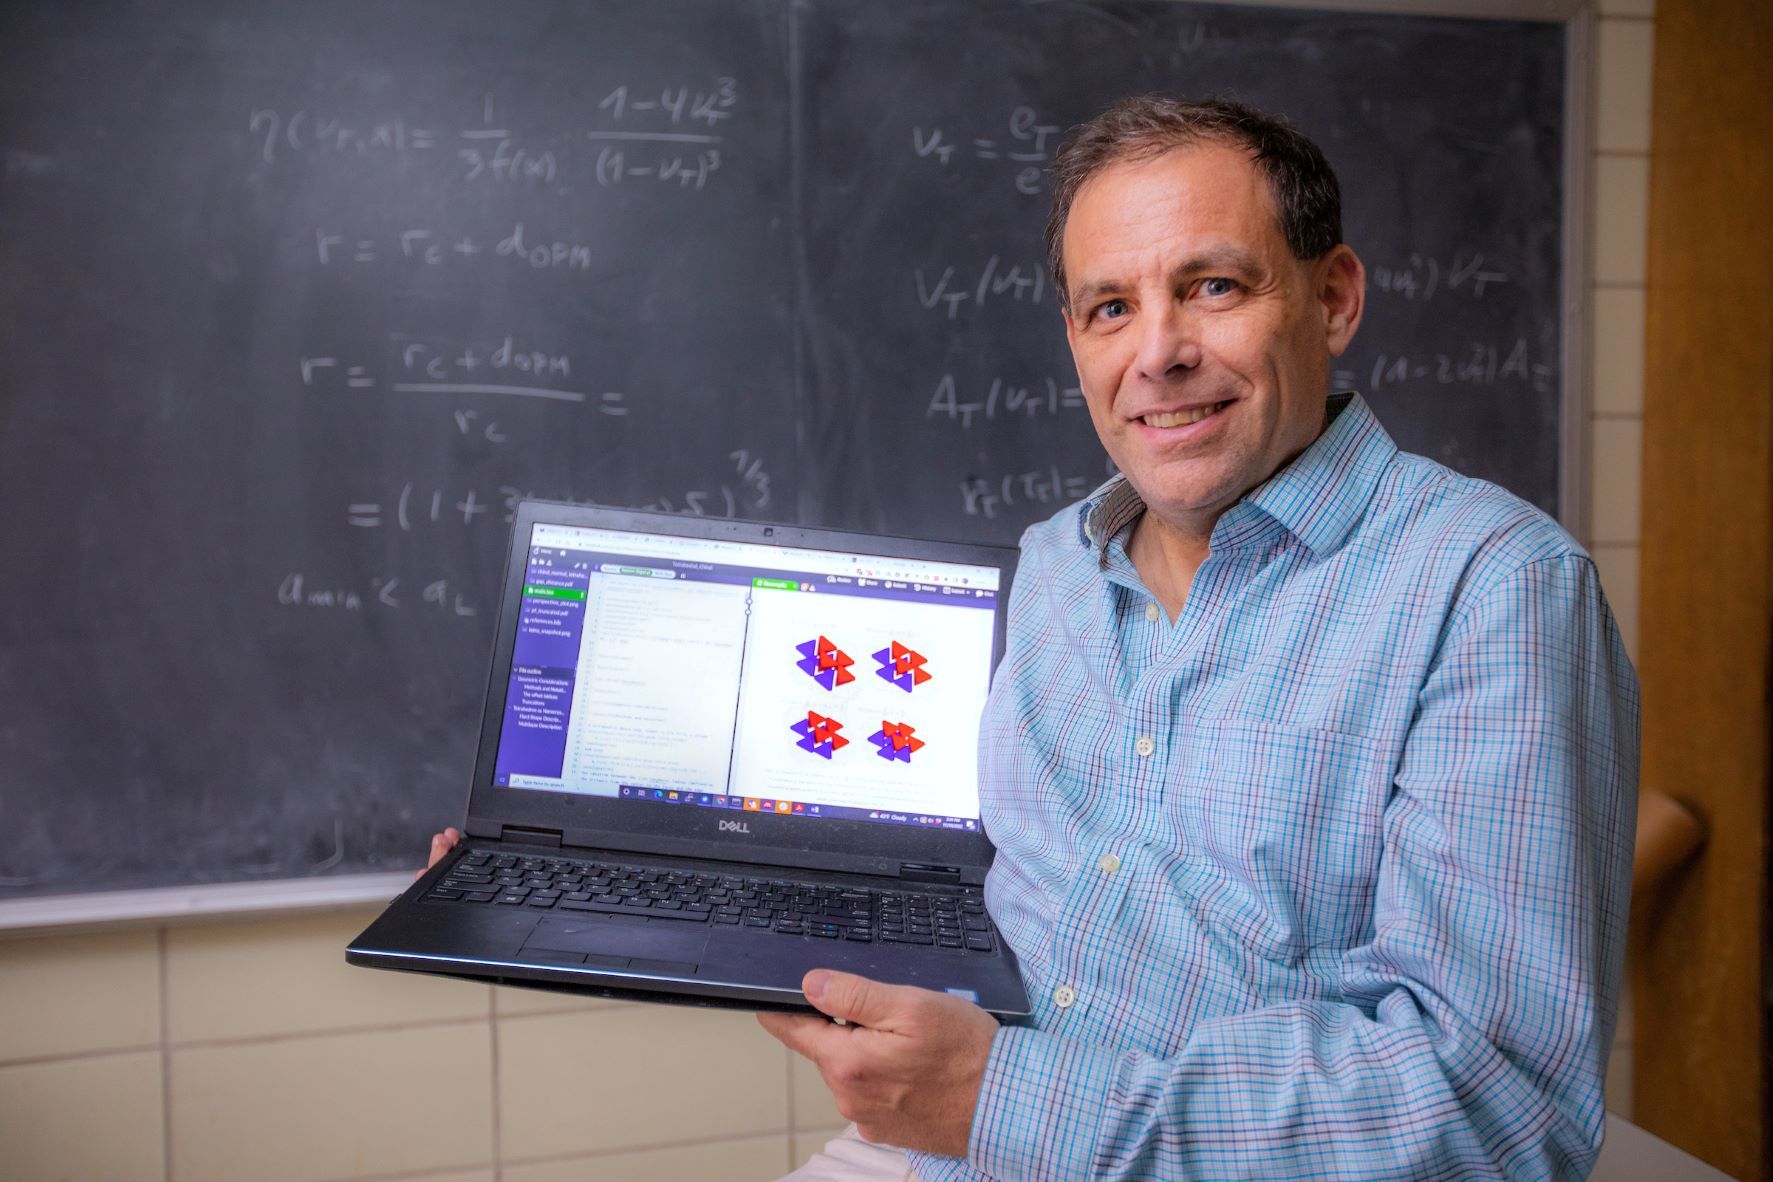 A photo showing theoretical physicist Alex Travesset in front of a blackboard full of equations and holding a laptop showing scientific figures.